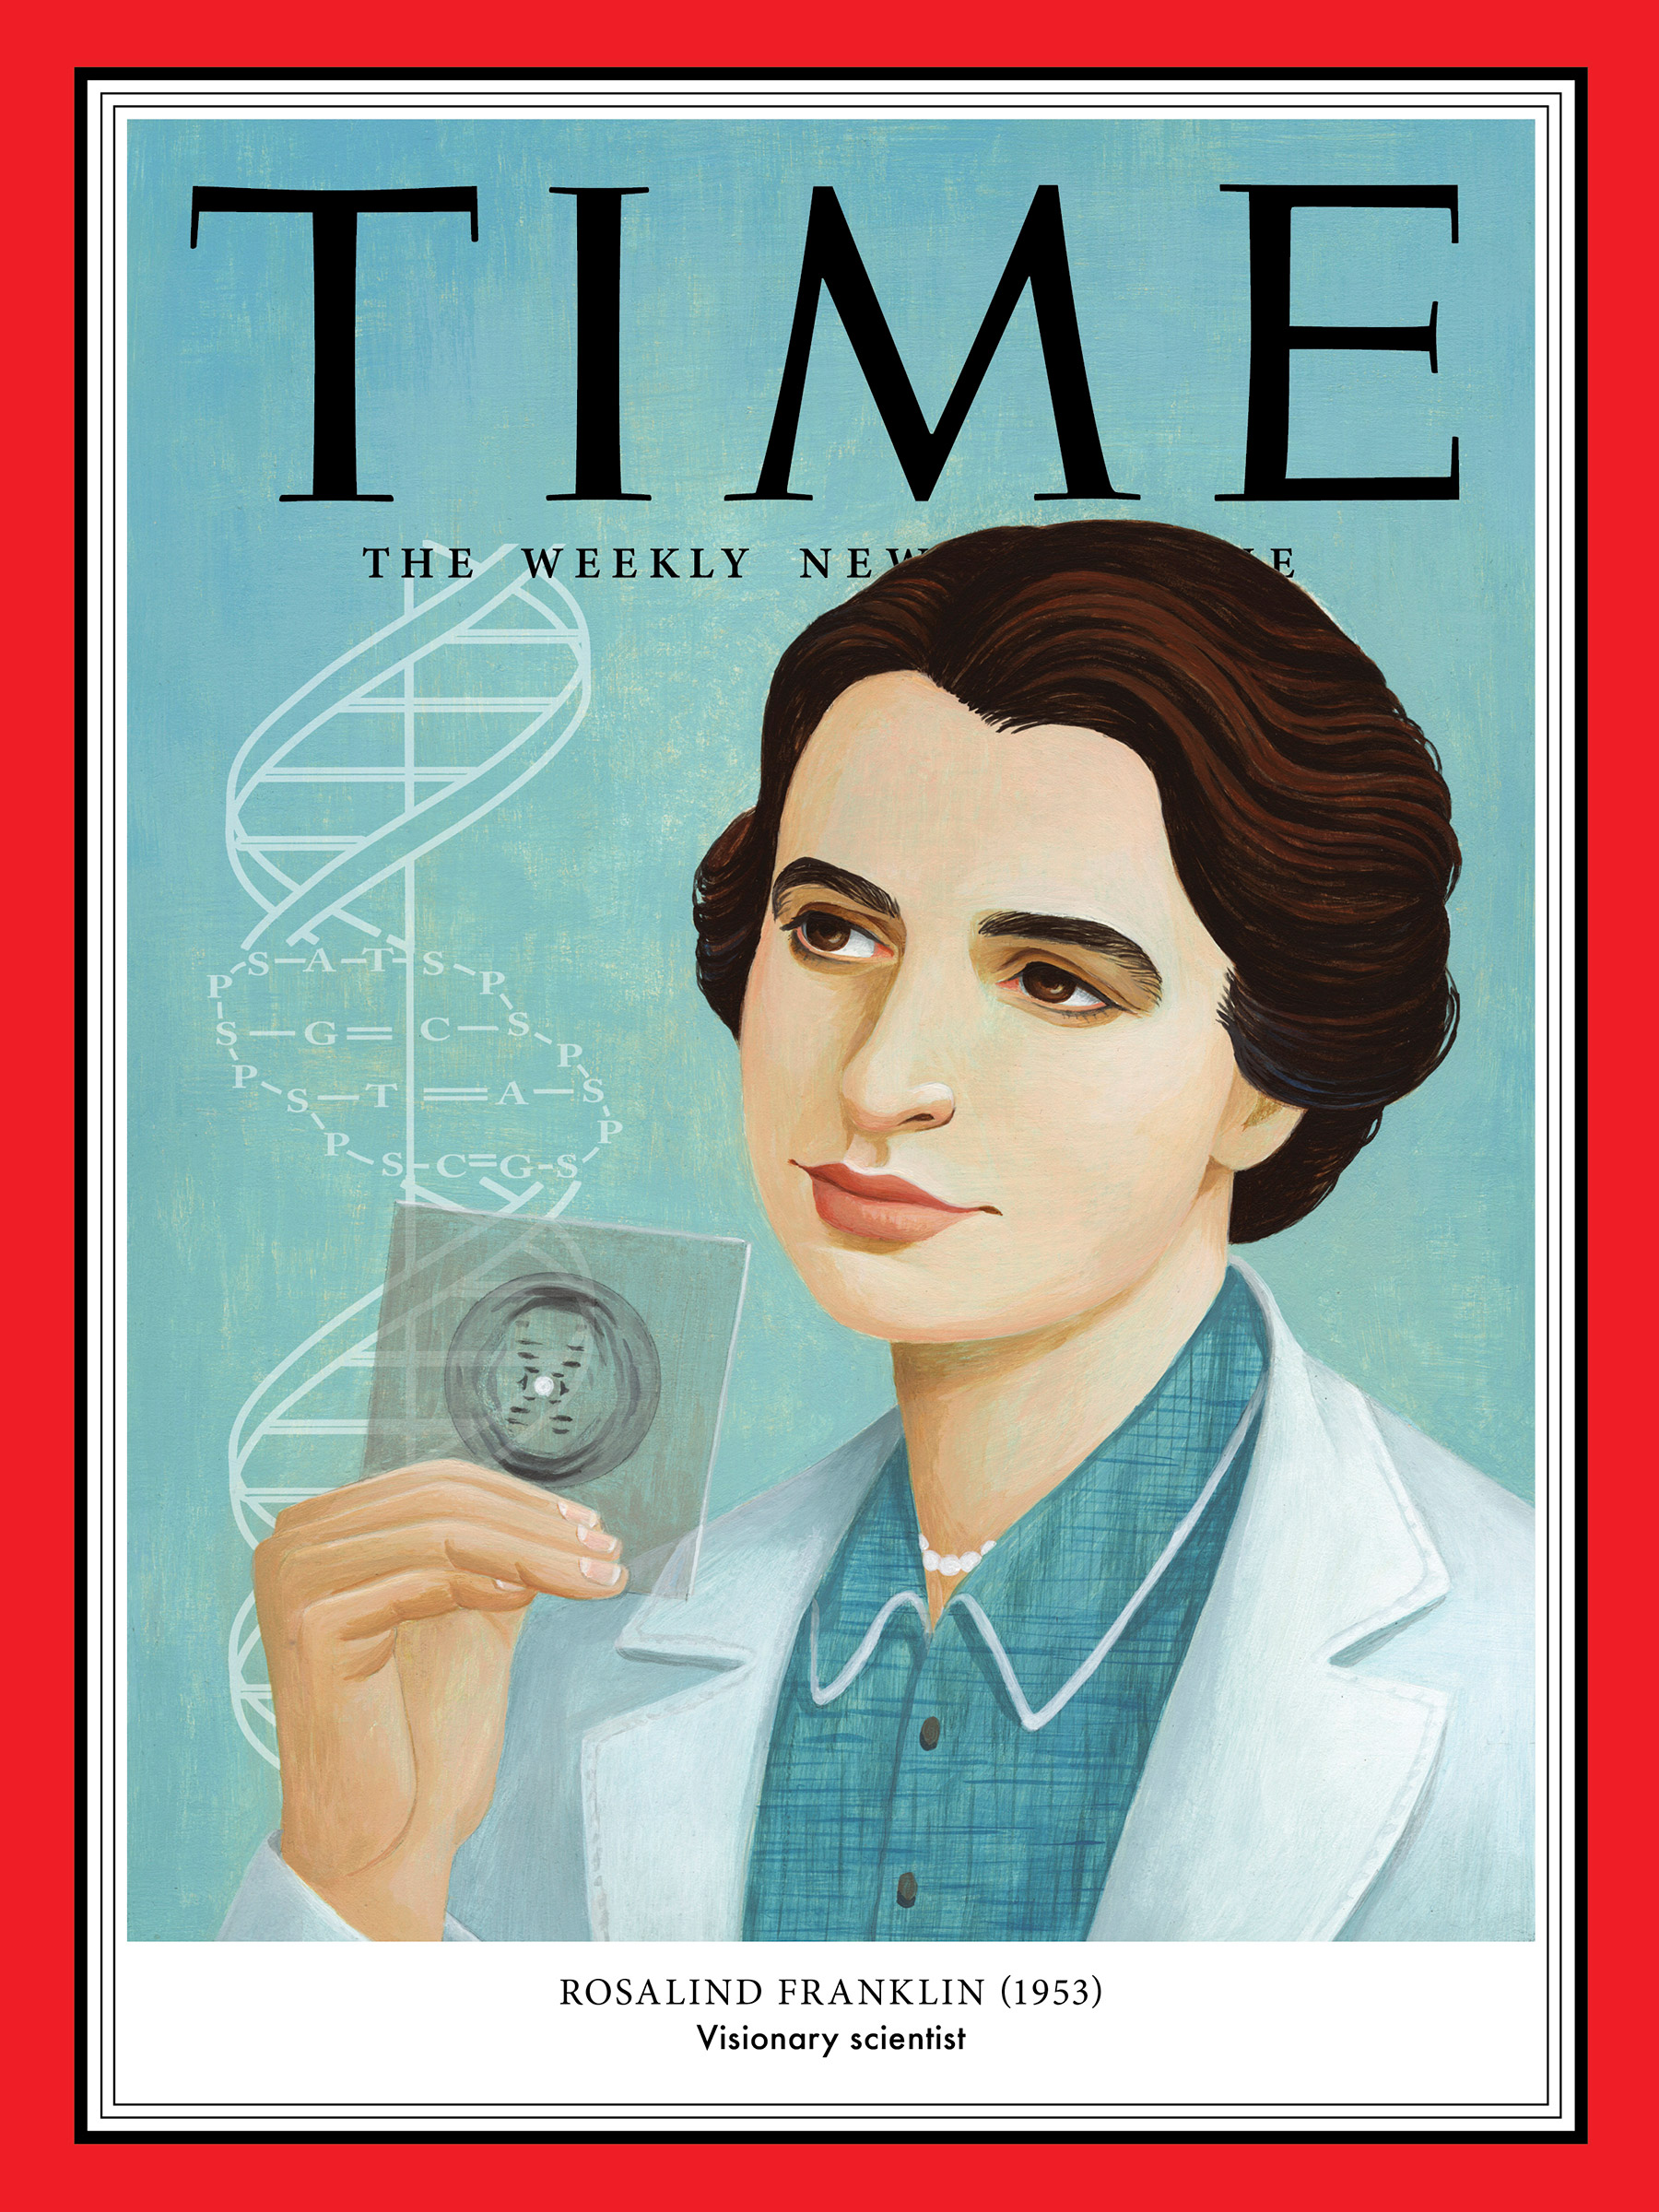 <a href="https://fineartamerica.com/featured/rosalind-franklin-1953-time.html"><strong>Buy the cover art→</strong></a> (Illustration by Jody Hewgill for TIME)